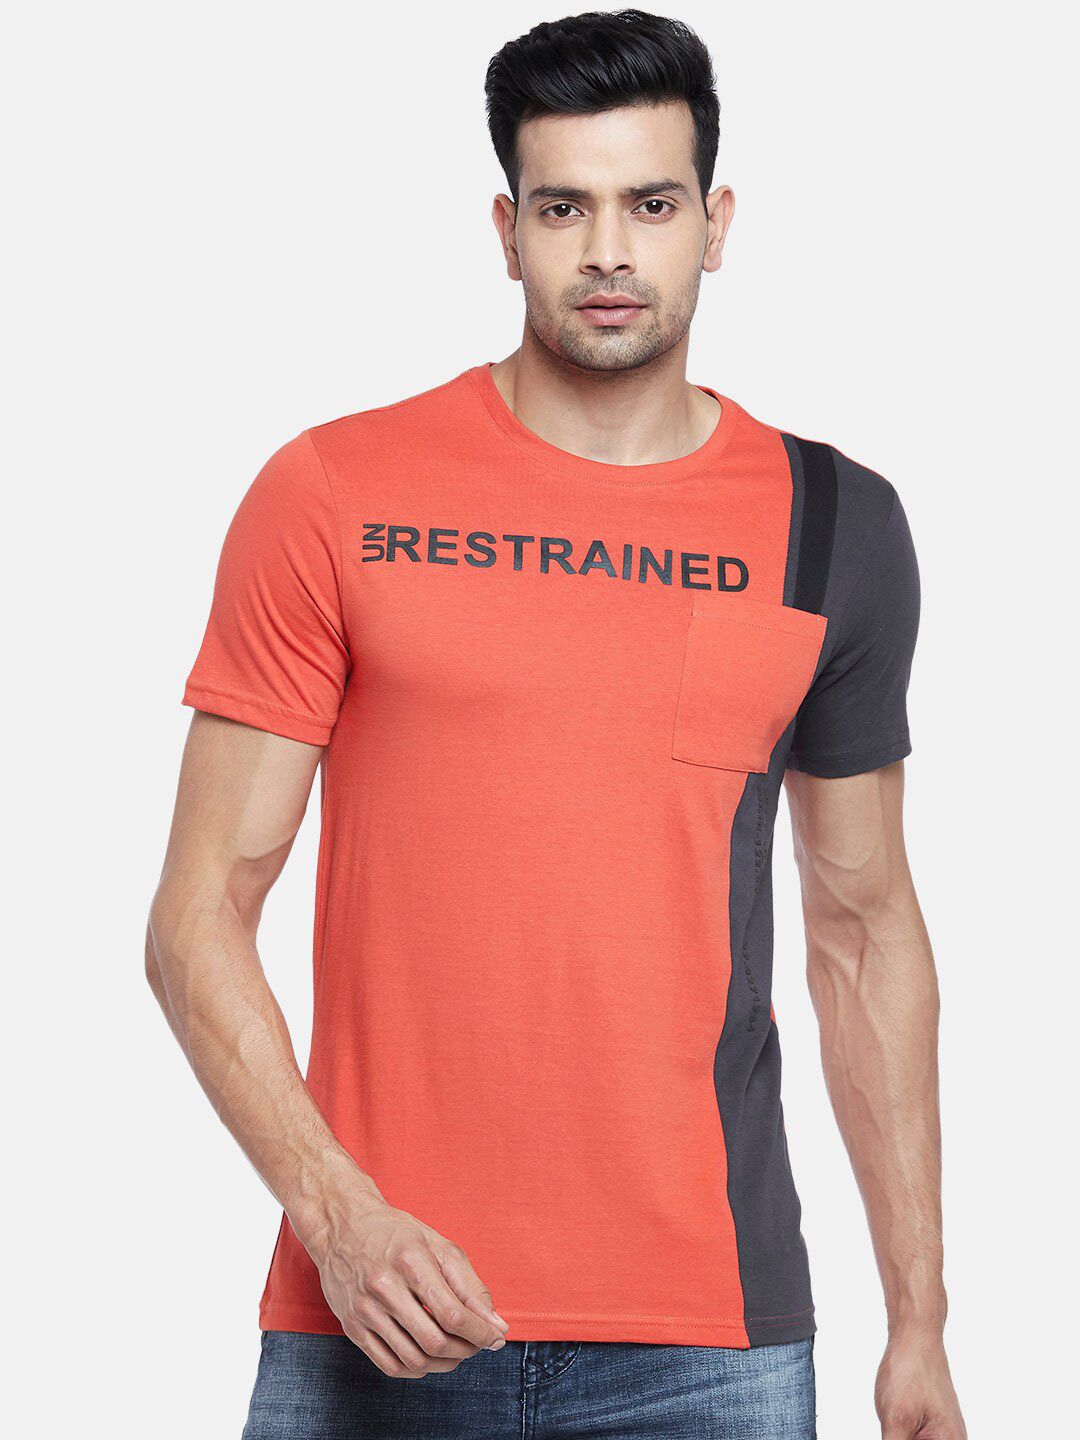 30% OFF on SF JEANS by Pantaloons Grey Top on Myntra